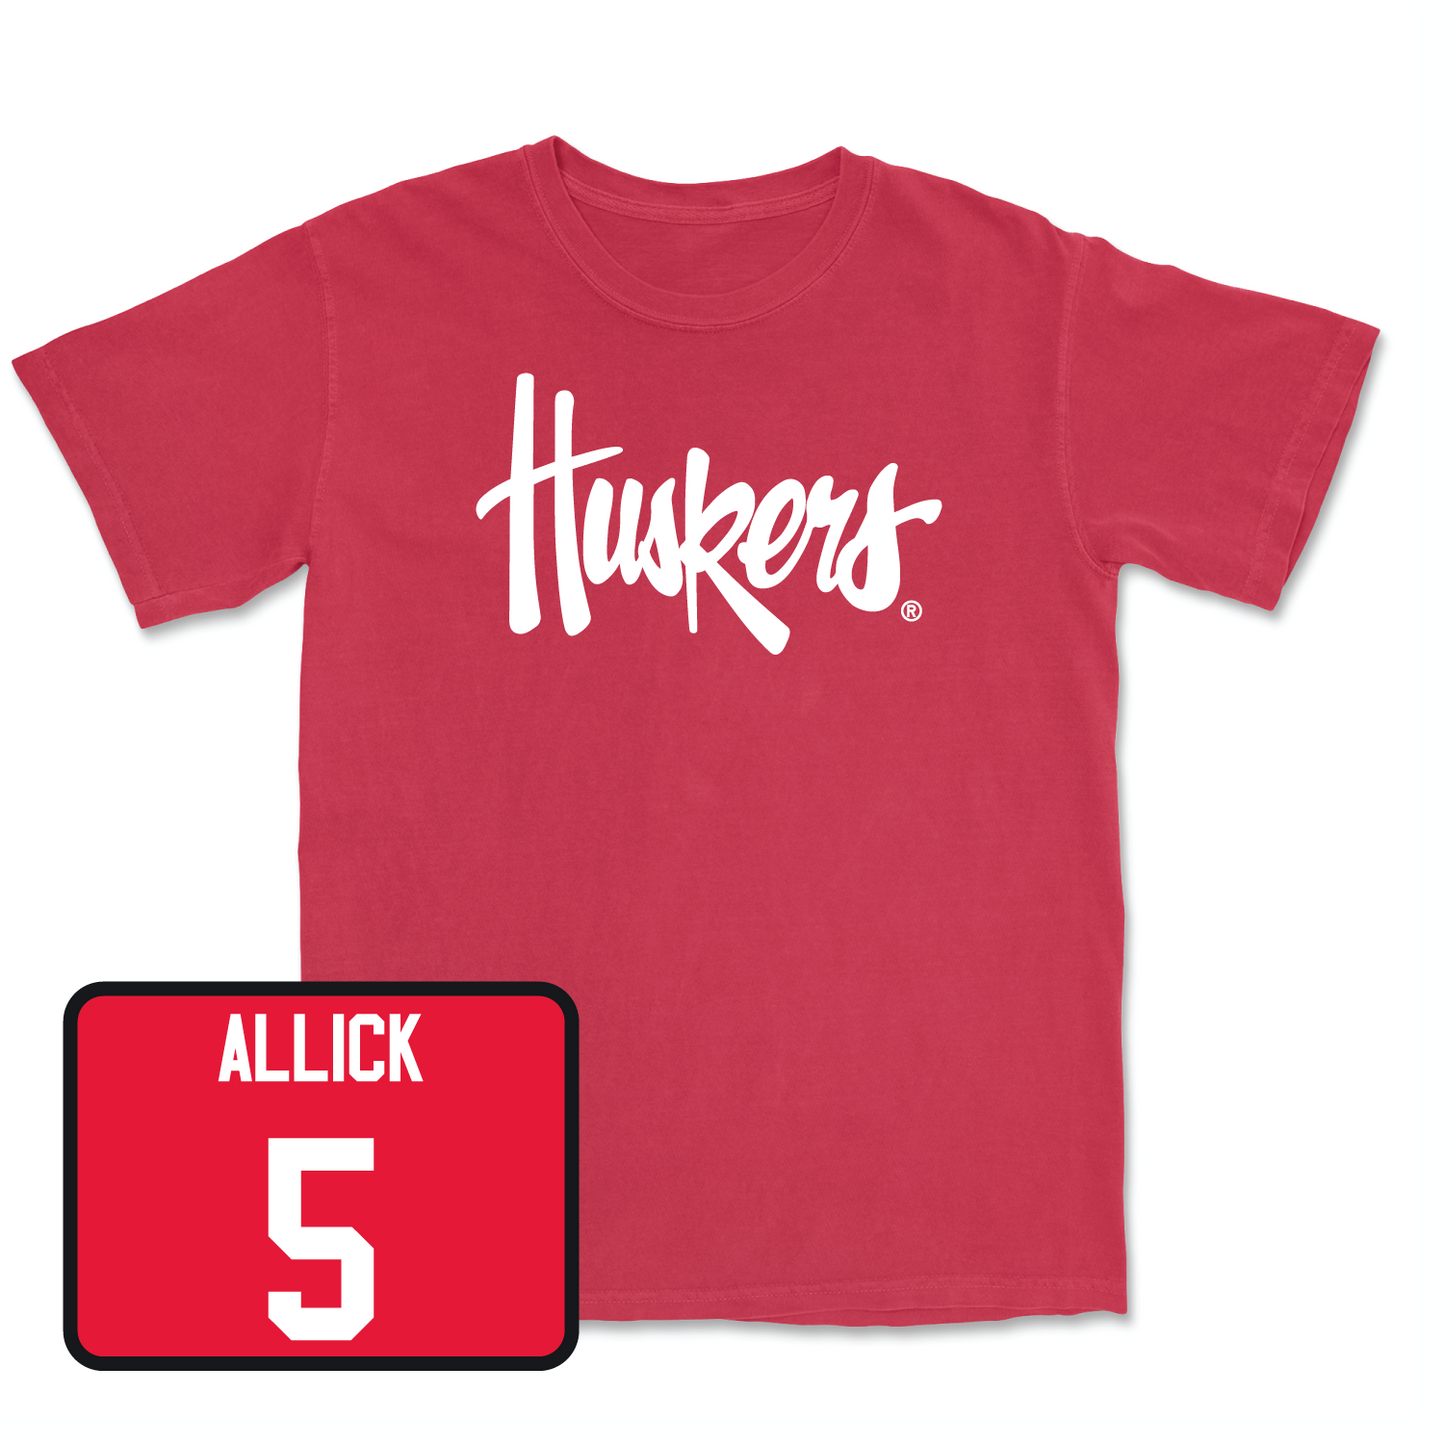 Red Women's Volleyball Huskers Tee Youth Medium / Rebekah Allick | #5